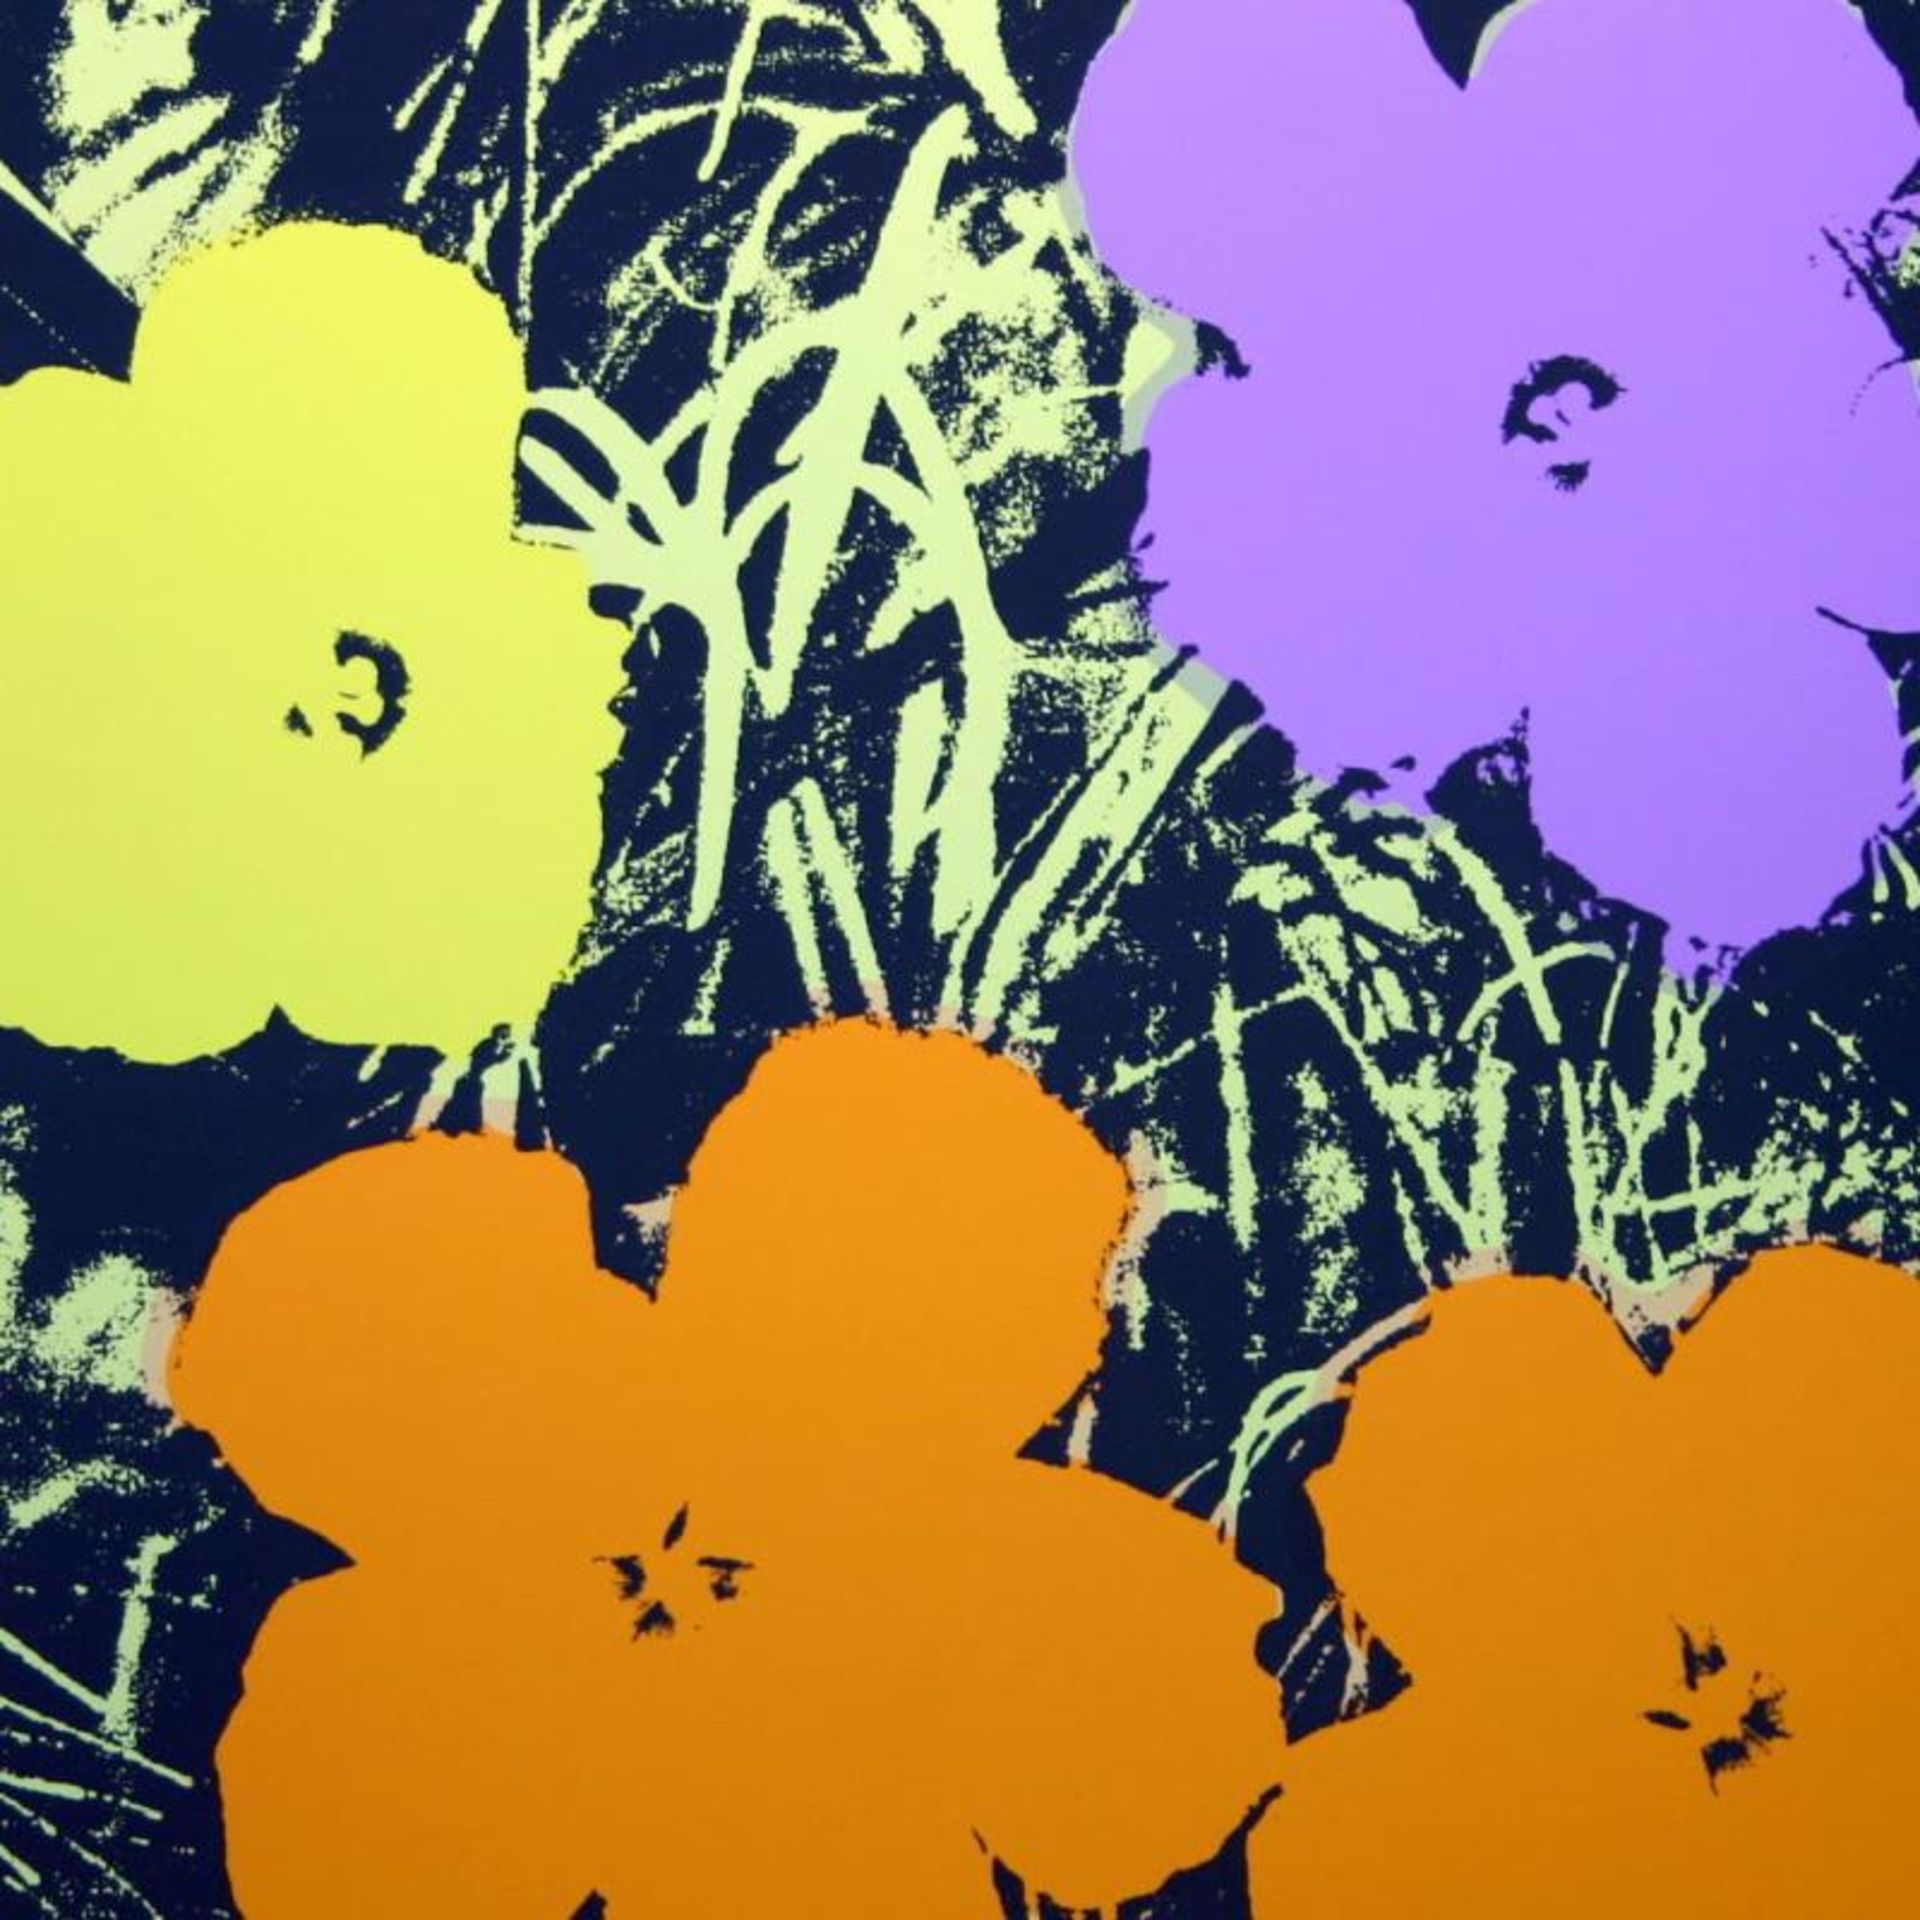 Flowers 11.67 by Warhol, Andy - Image 2 of 2